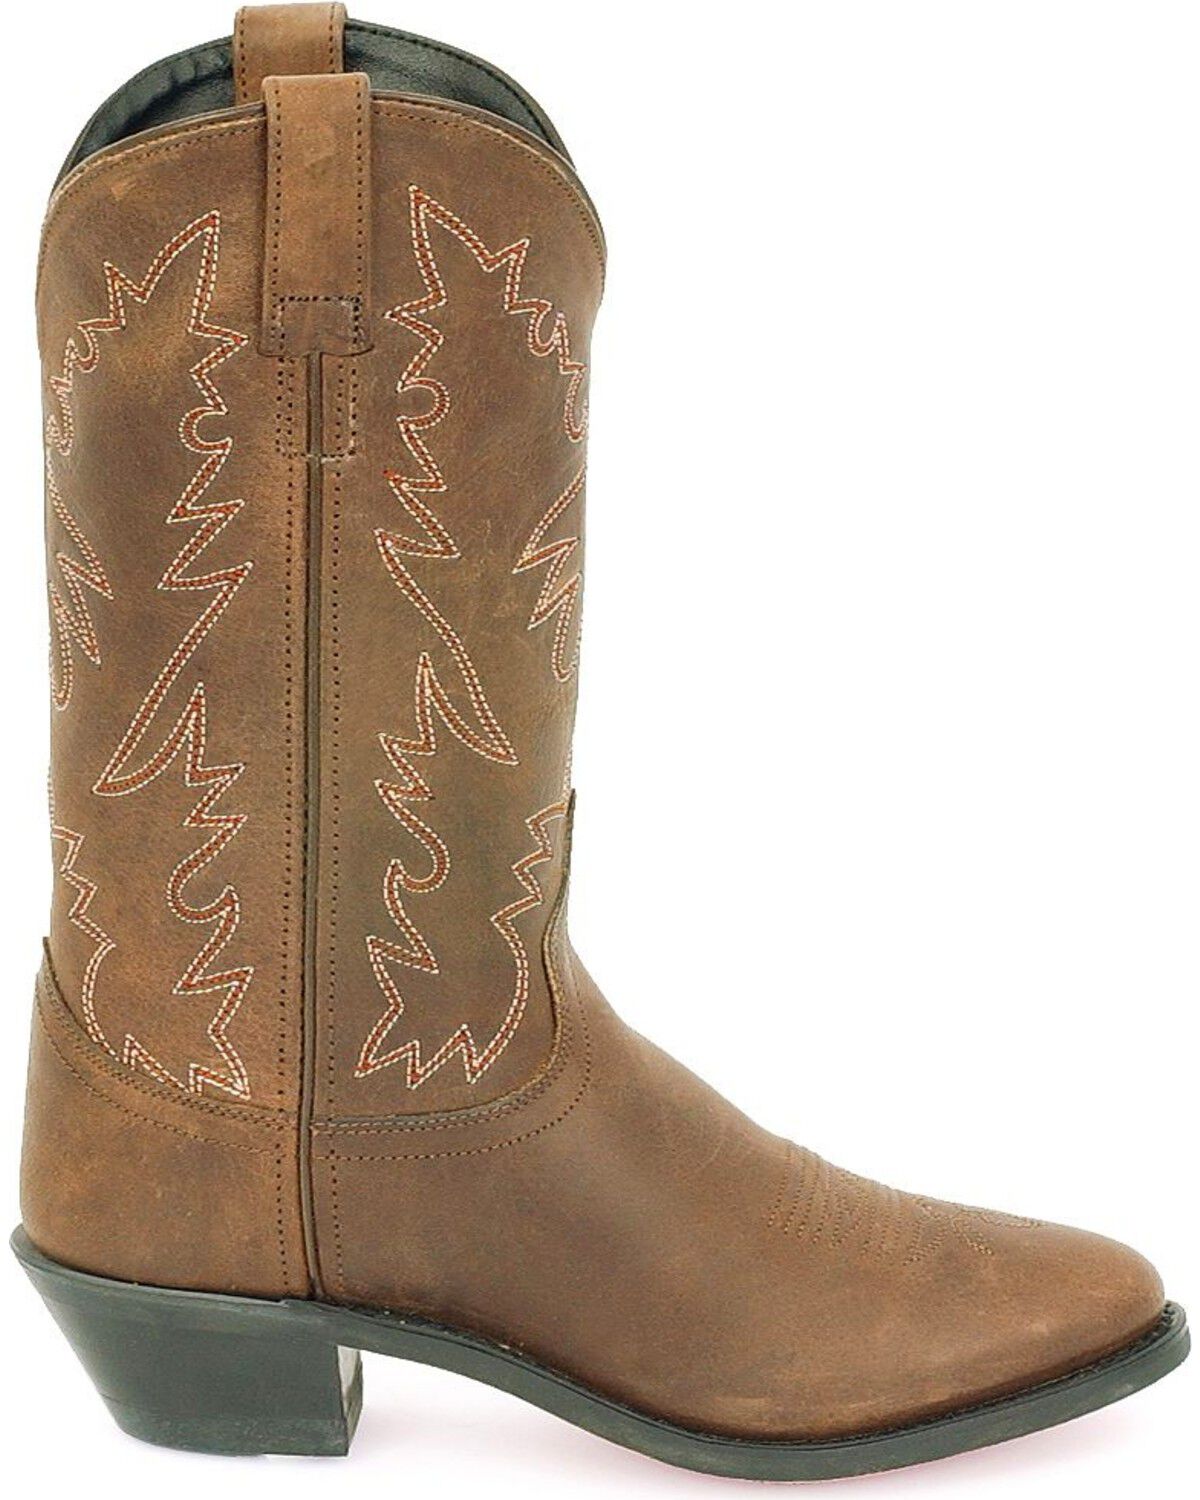 Old West Women's Distressed Leather 